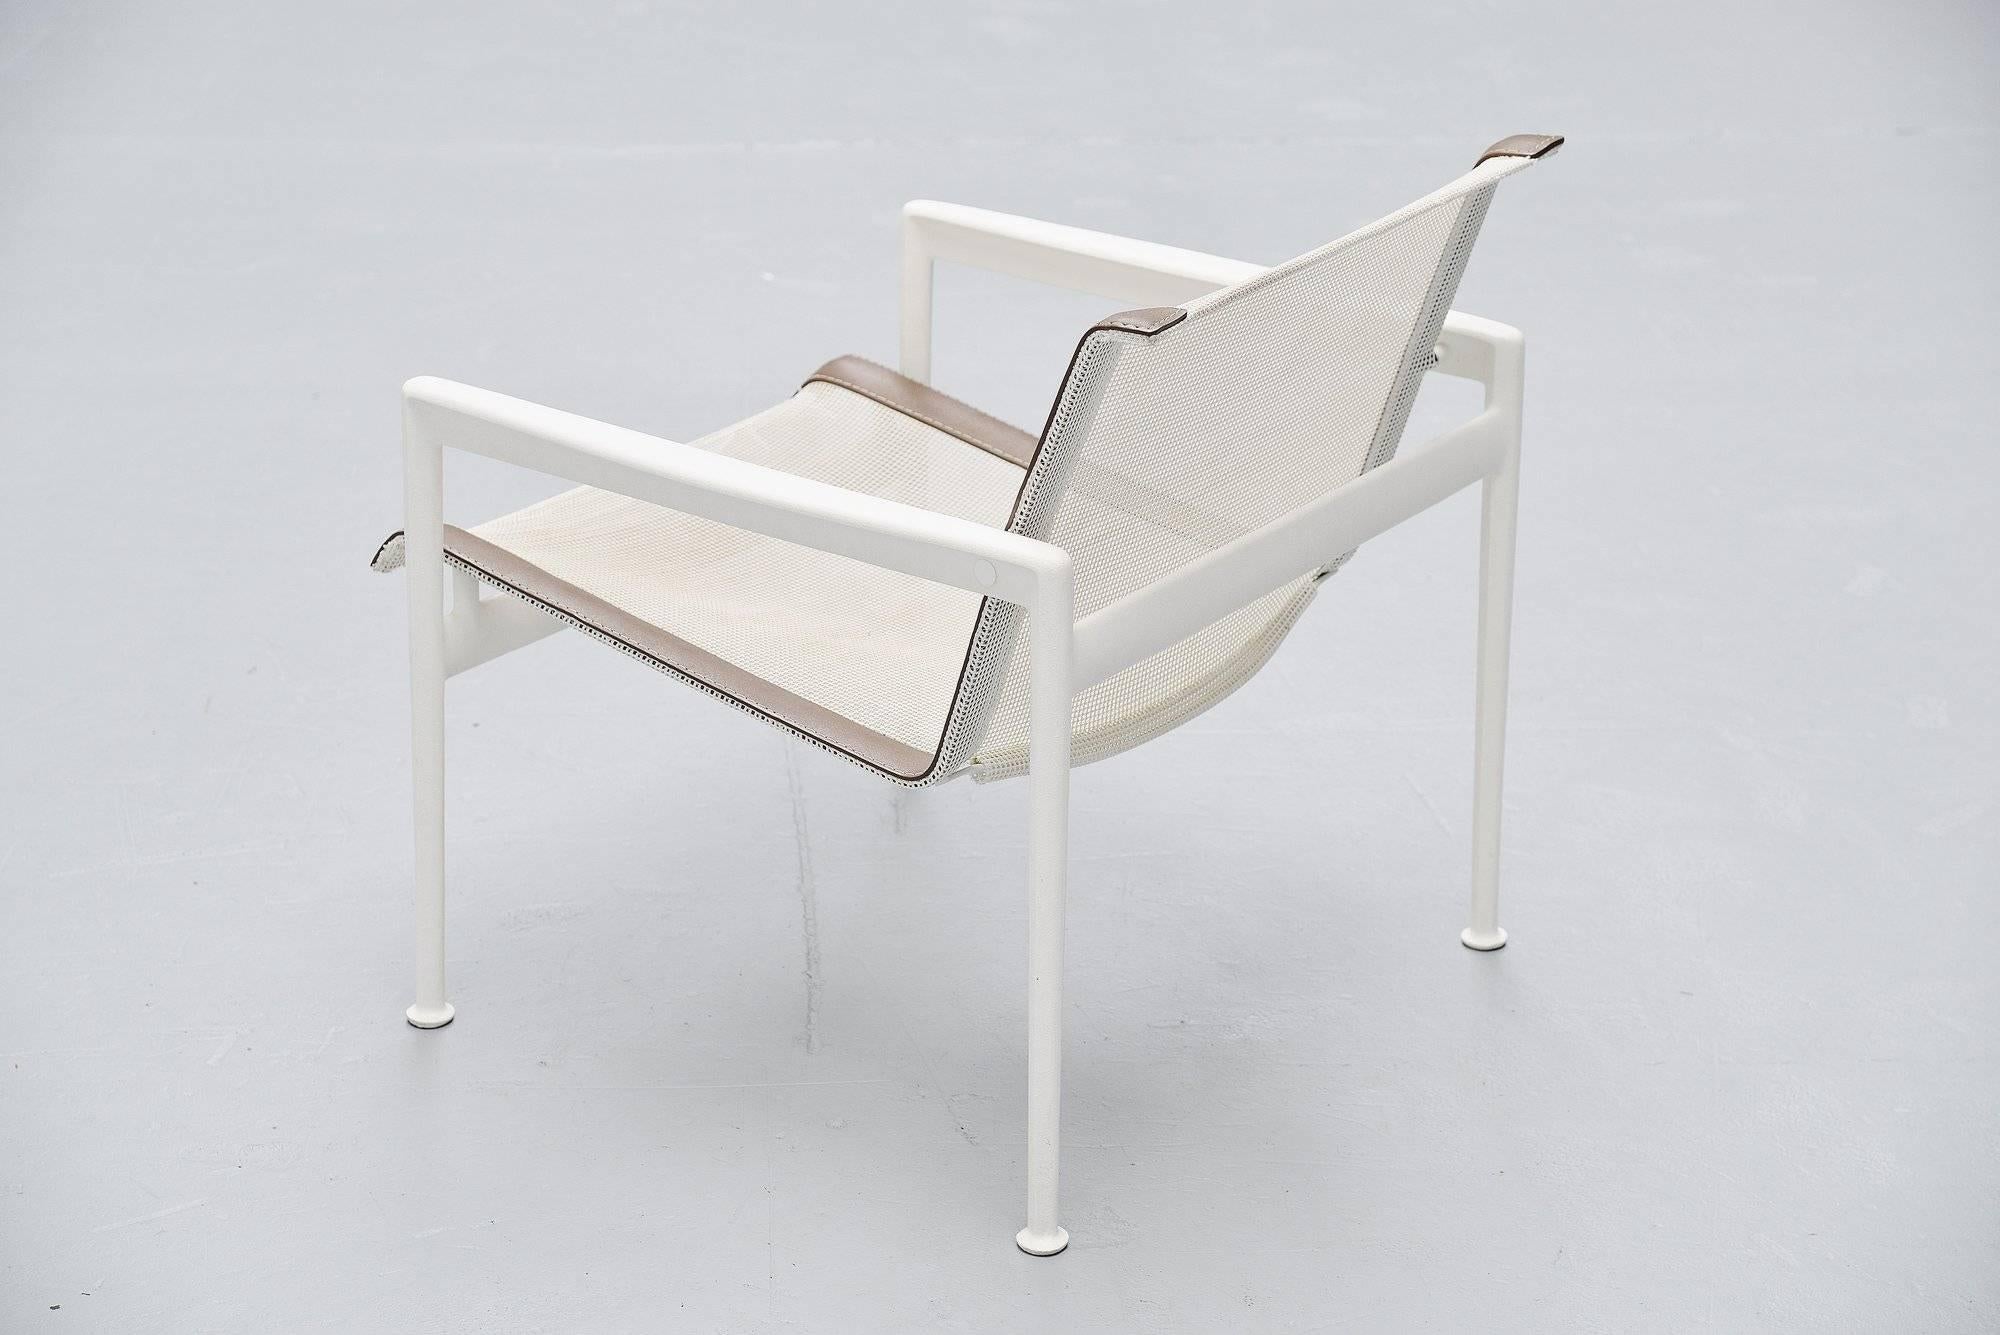 For sure the nicest vintage designed garden furniture around. This chair is designed by Richard Schultz and manufactured by Knoll International, USA 1966. Richard Schultz designed the 1966 Collection at the request of Florence Knoll who, after